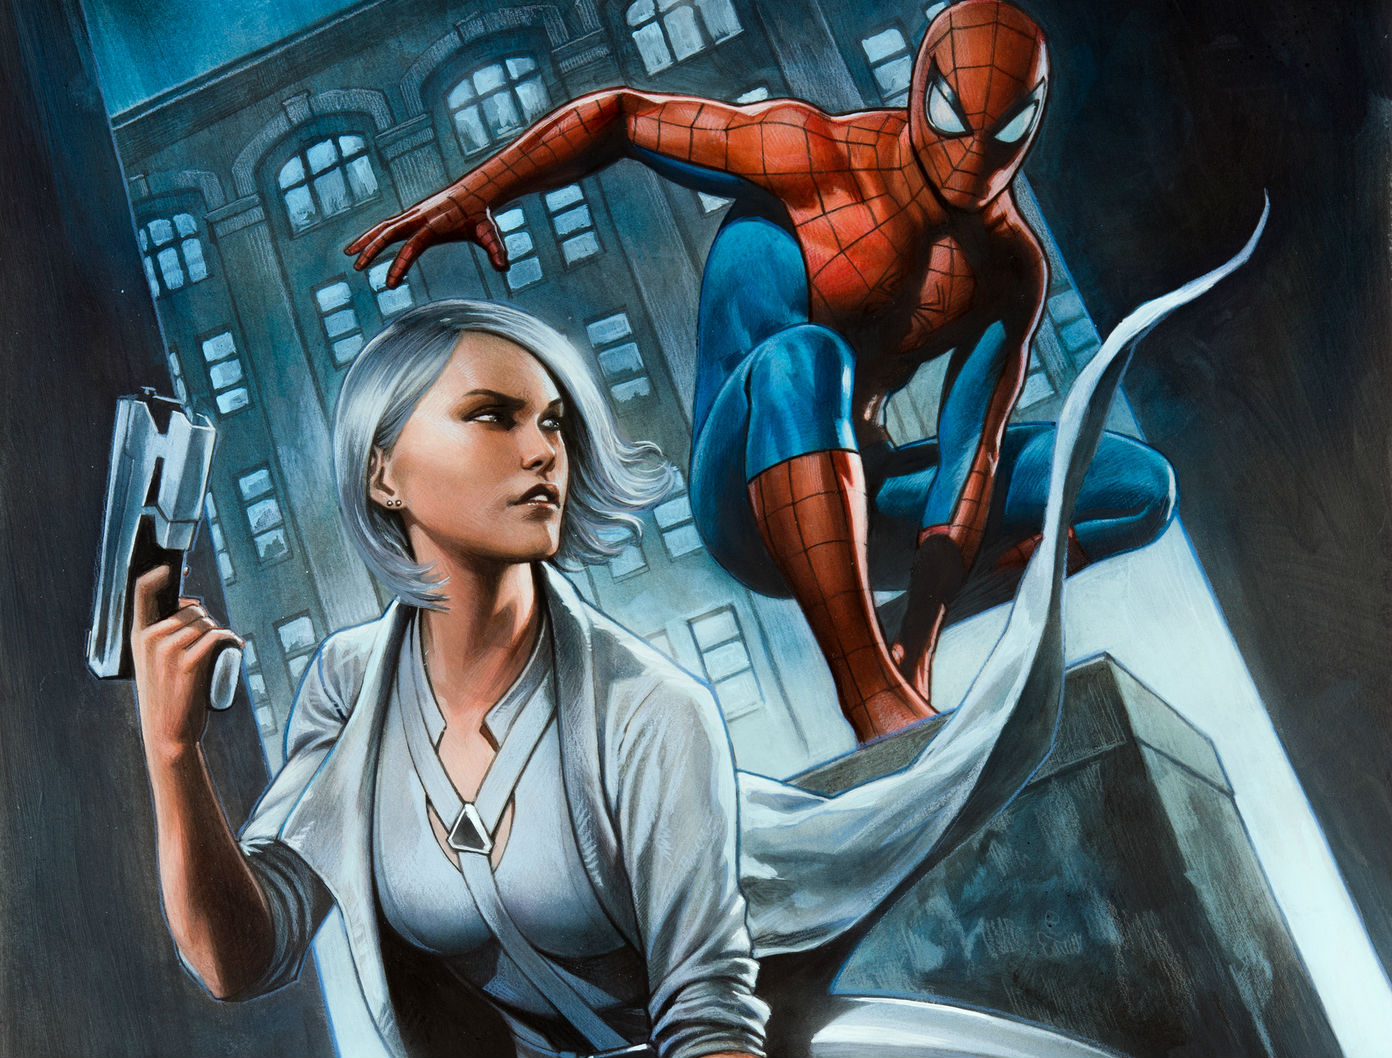 I really hope we get a lot of DLC with Spider-Man 2. Let me know what kind  of DLC you guys would like.